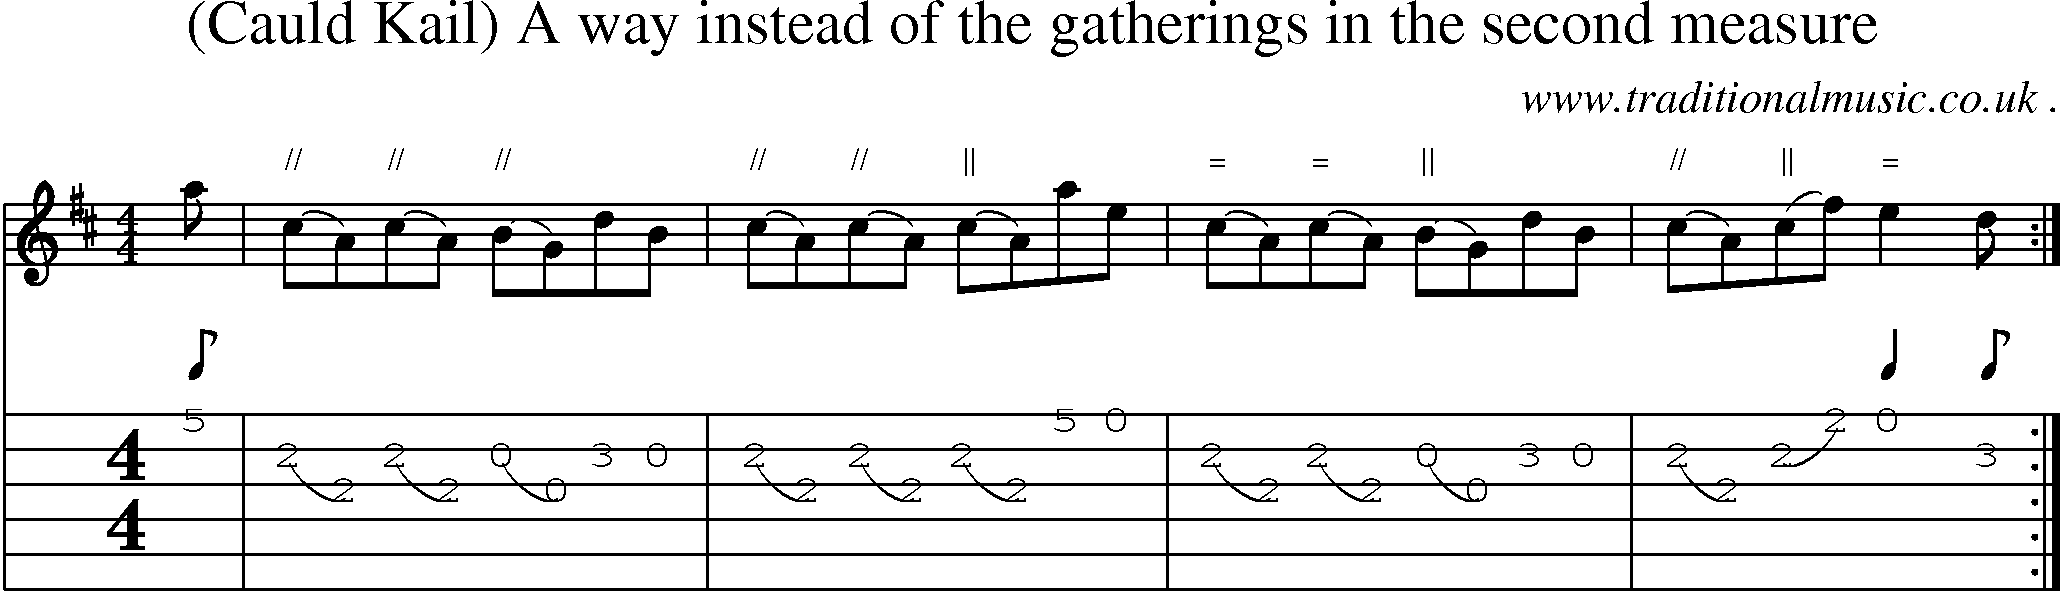 Sheet-music  score, Chords and Guitar Tabs for Cauld Kail A Way Instead Of The Gatherings In The Second Measure